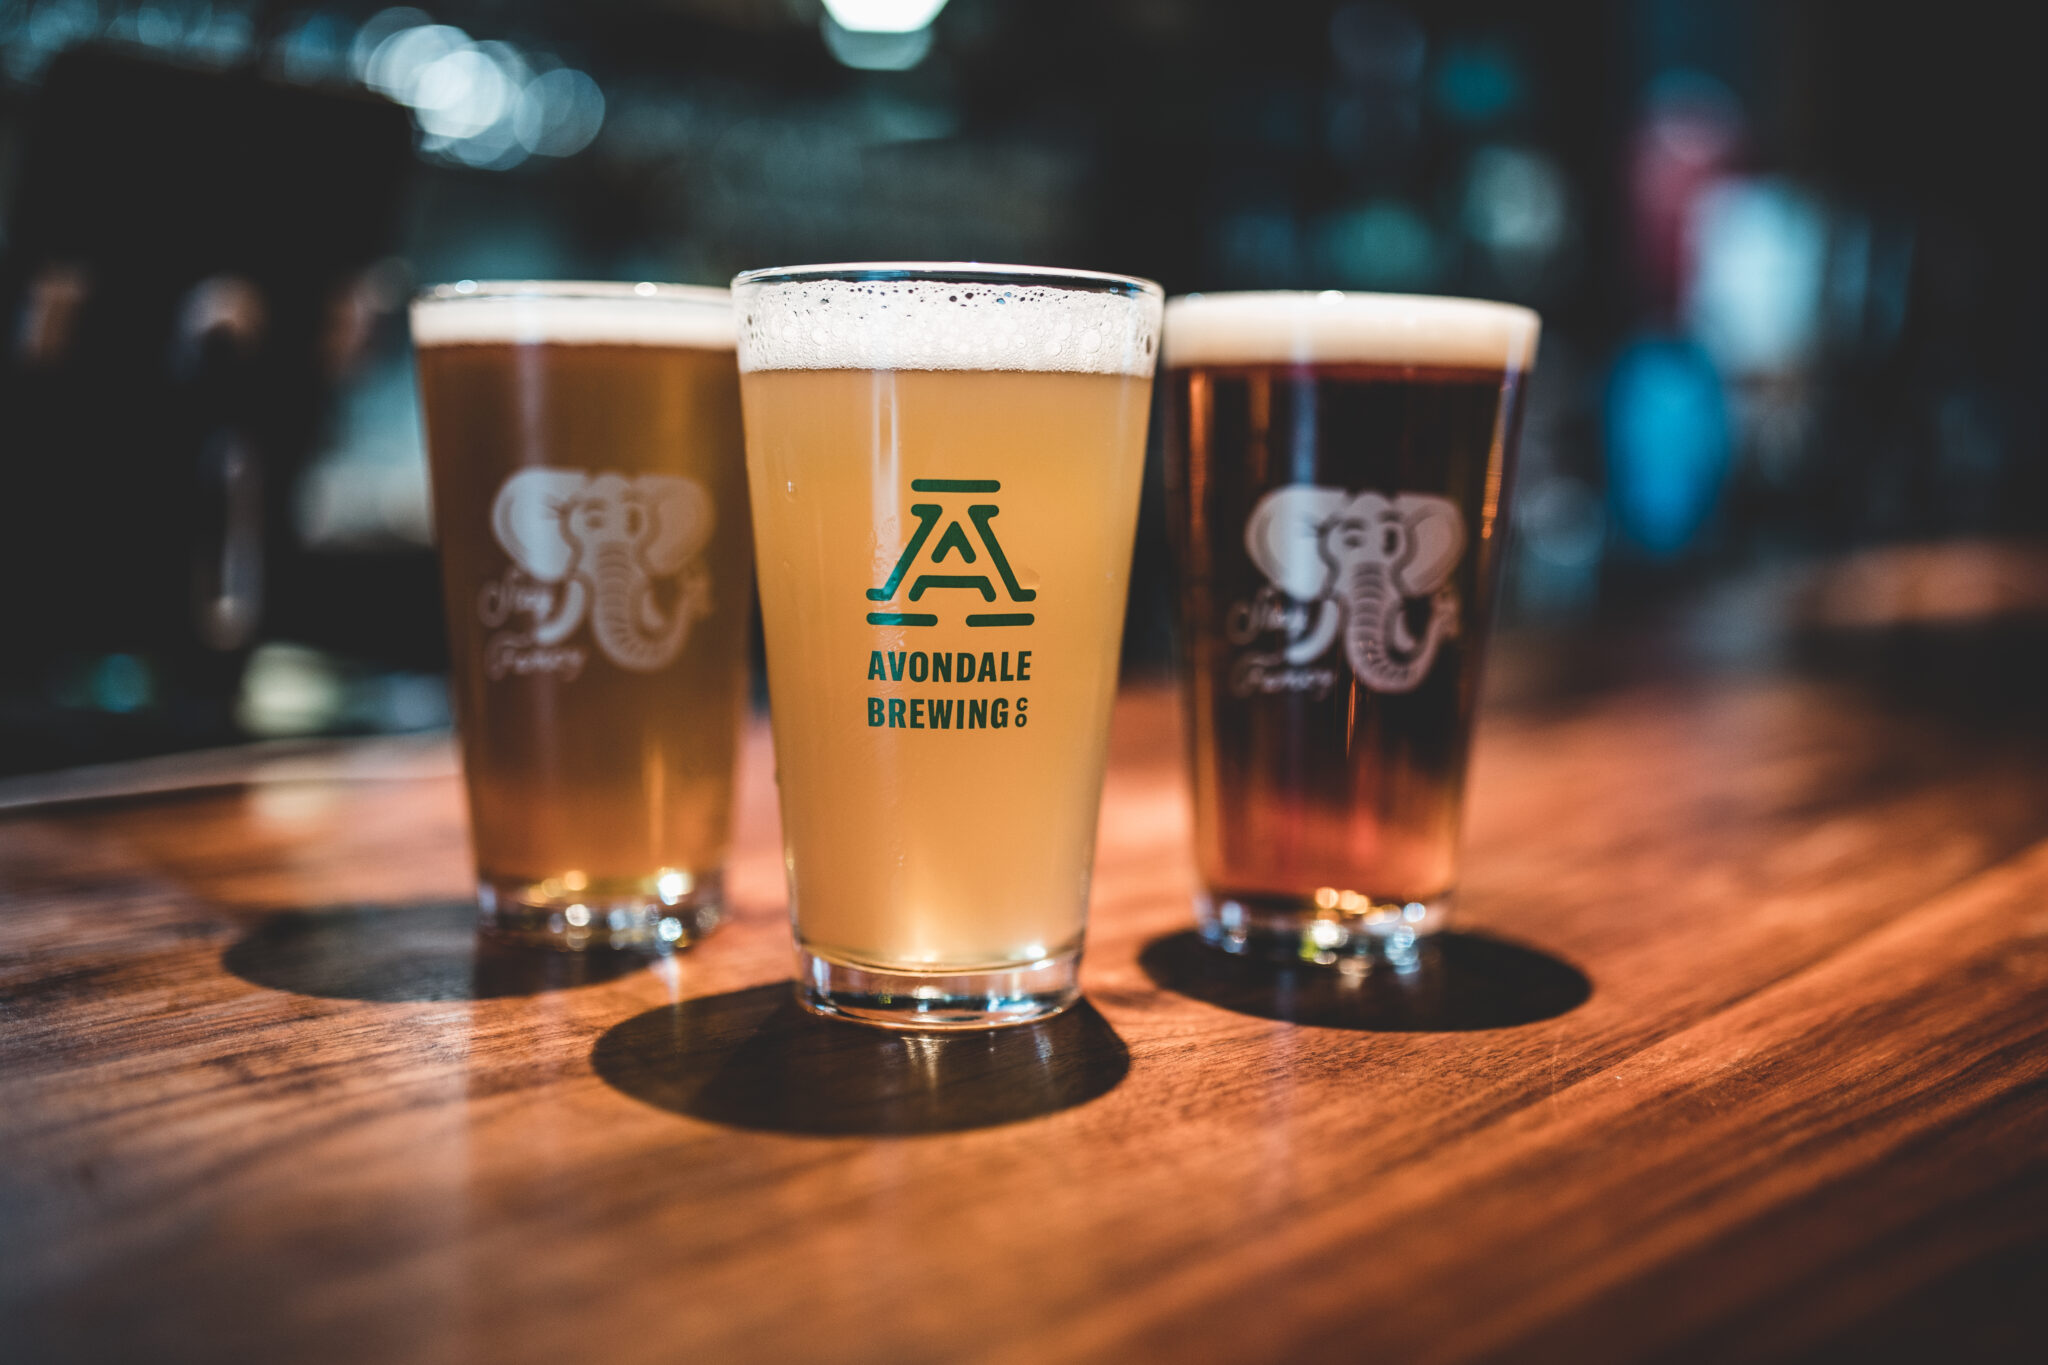 Avondale Brewing 1 23 Birmingham area festivals and events to look forward to this spring